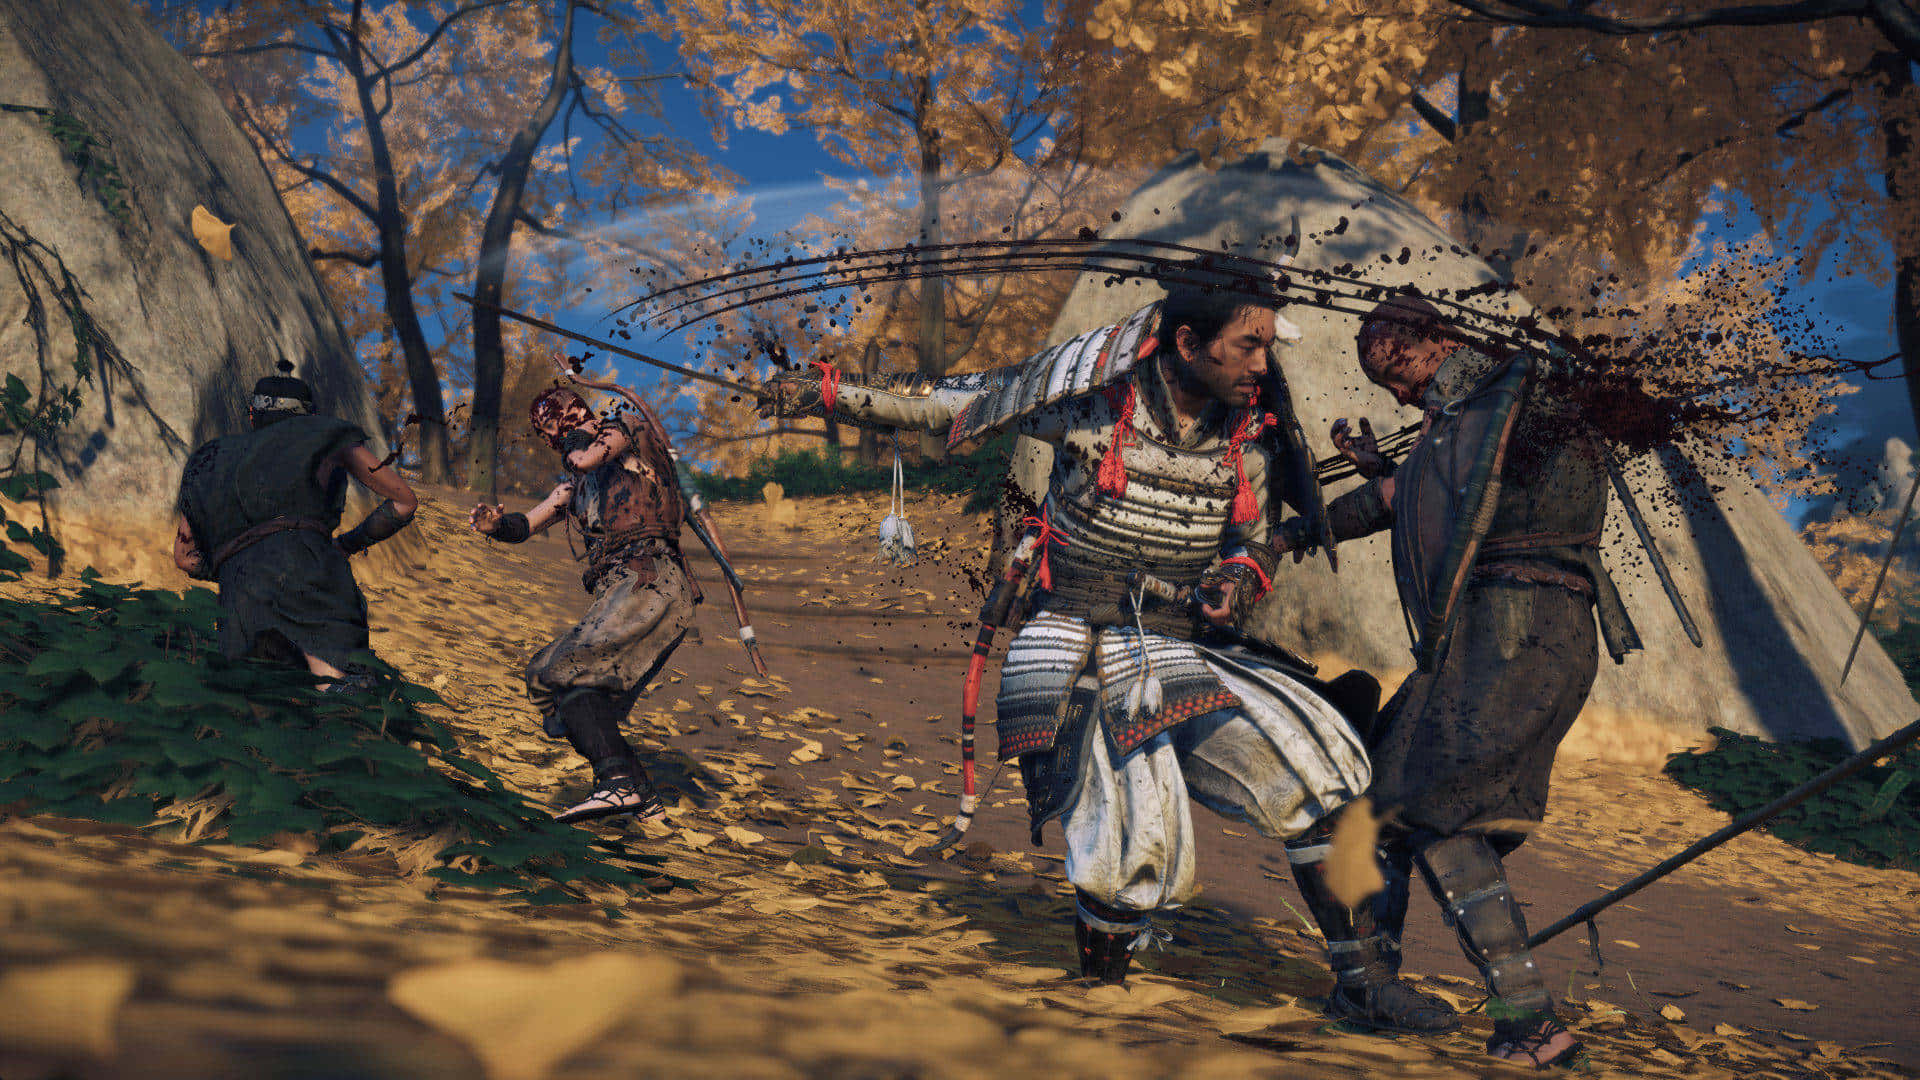 Venture into the realm of mythical Japan in the game, Ghost of Tsushima.